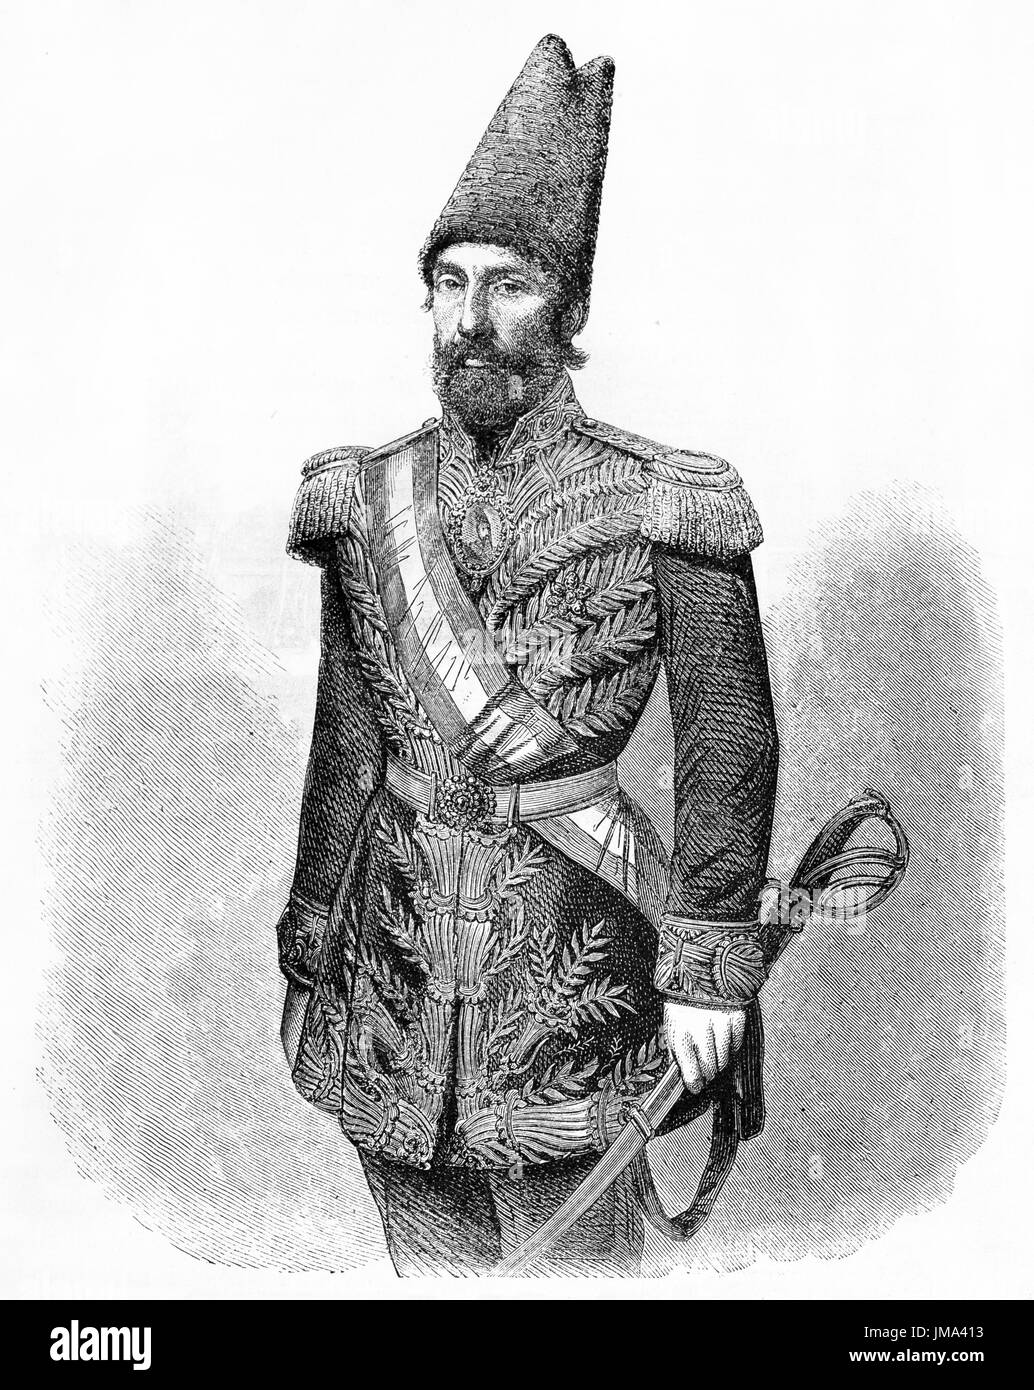 portrait of Mourad Mirza, Khorasan governor, posing in official uniform and with military pose. Etching style art by Hadamard, Le Tour du Monde, 1861 Stock Photo